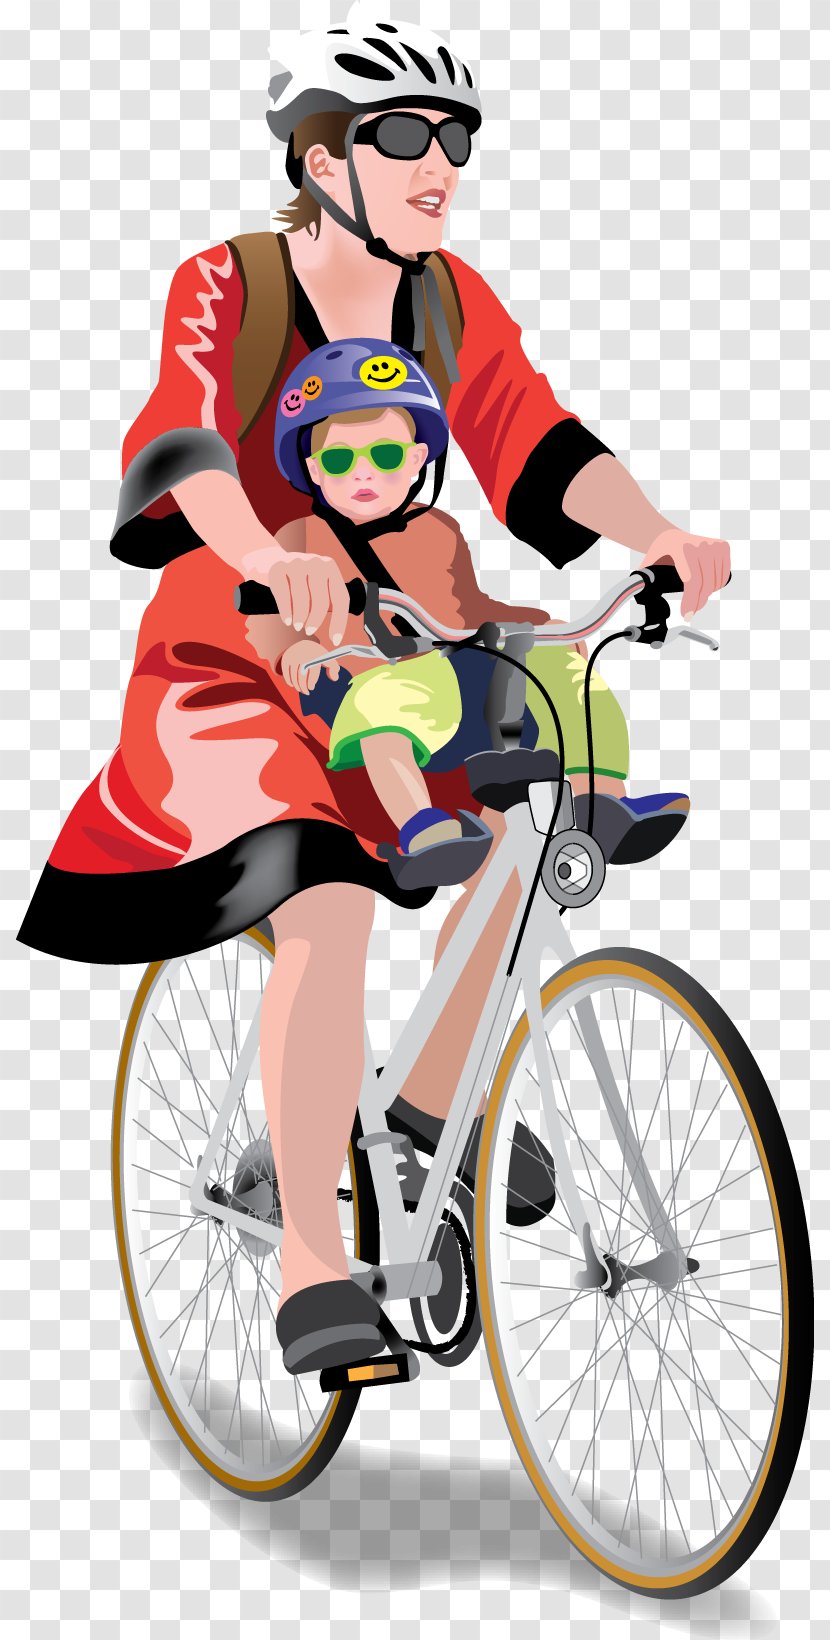 Bicycle Pedals Wheels Cycling Saddles - Headgear Transparent PNG